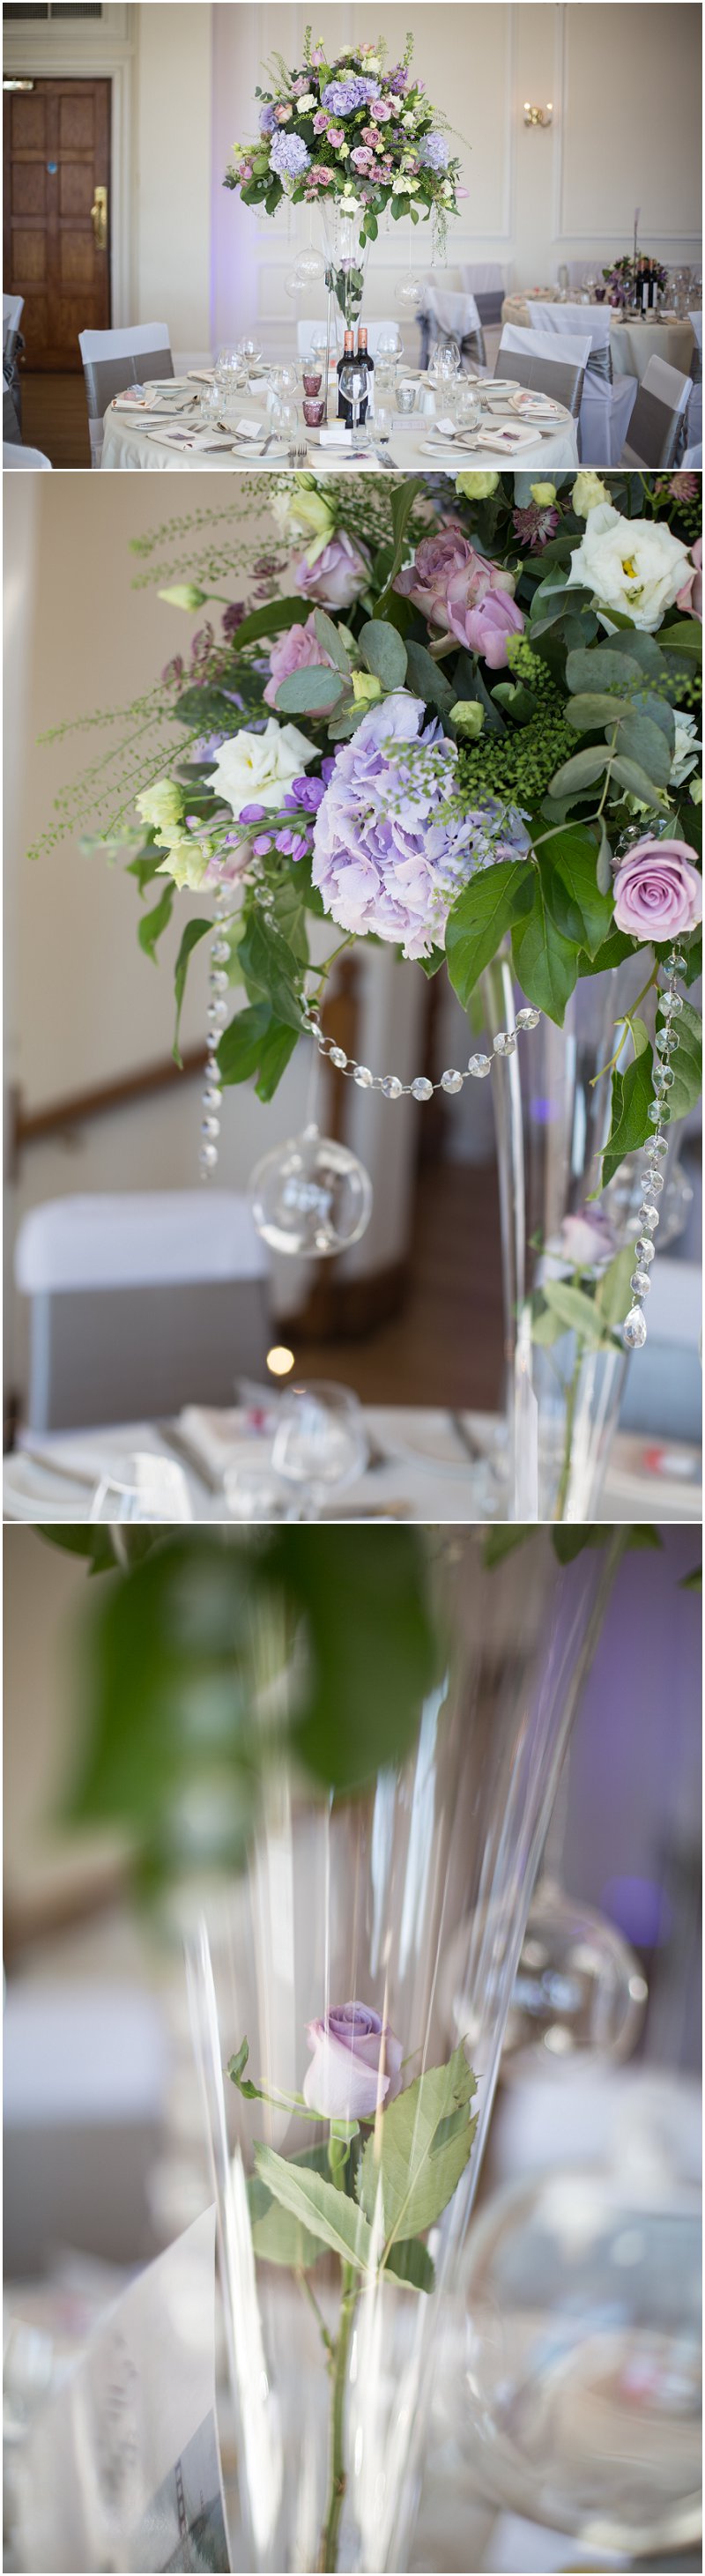 Beautiful table decorations at West Tower wedding venue